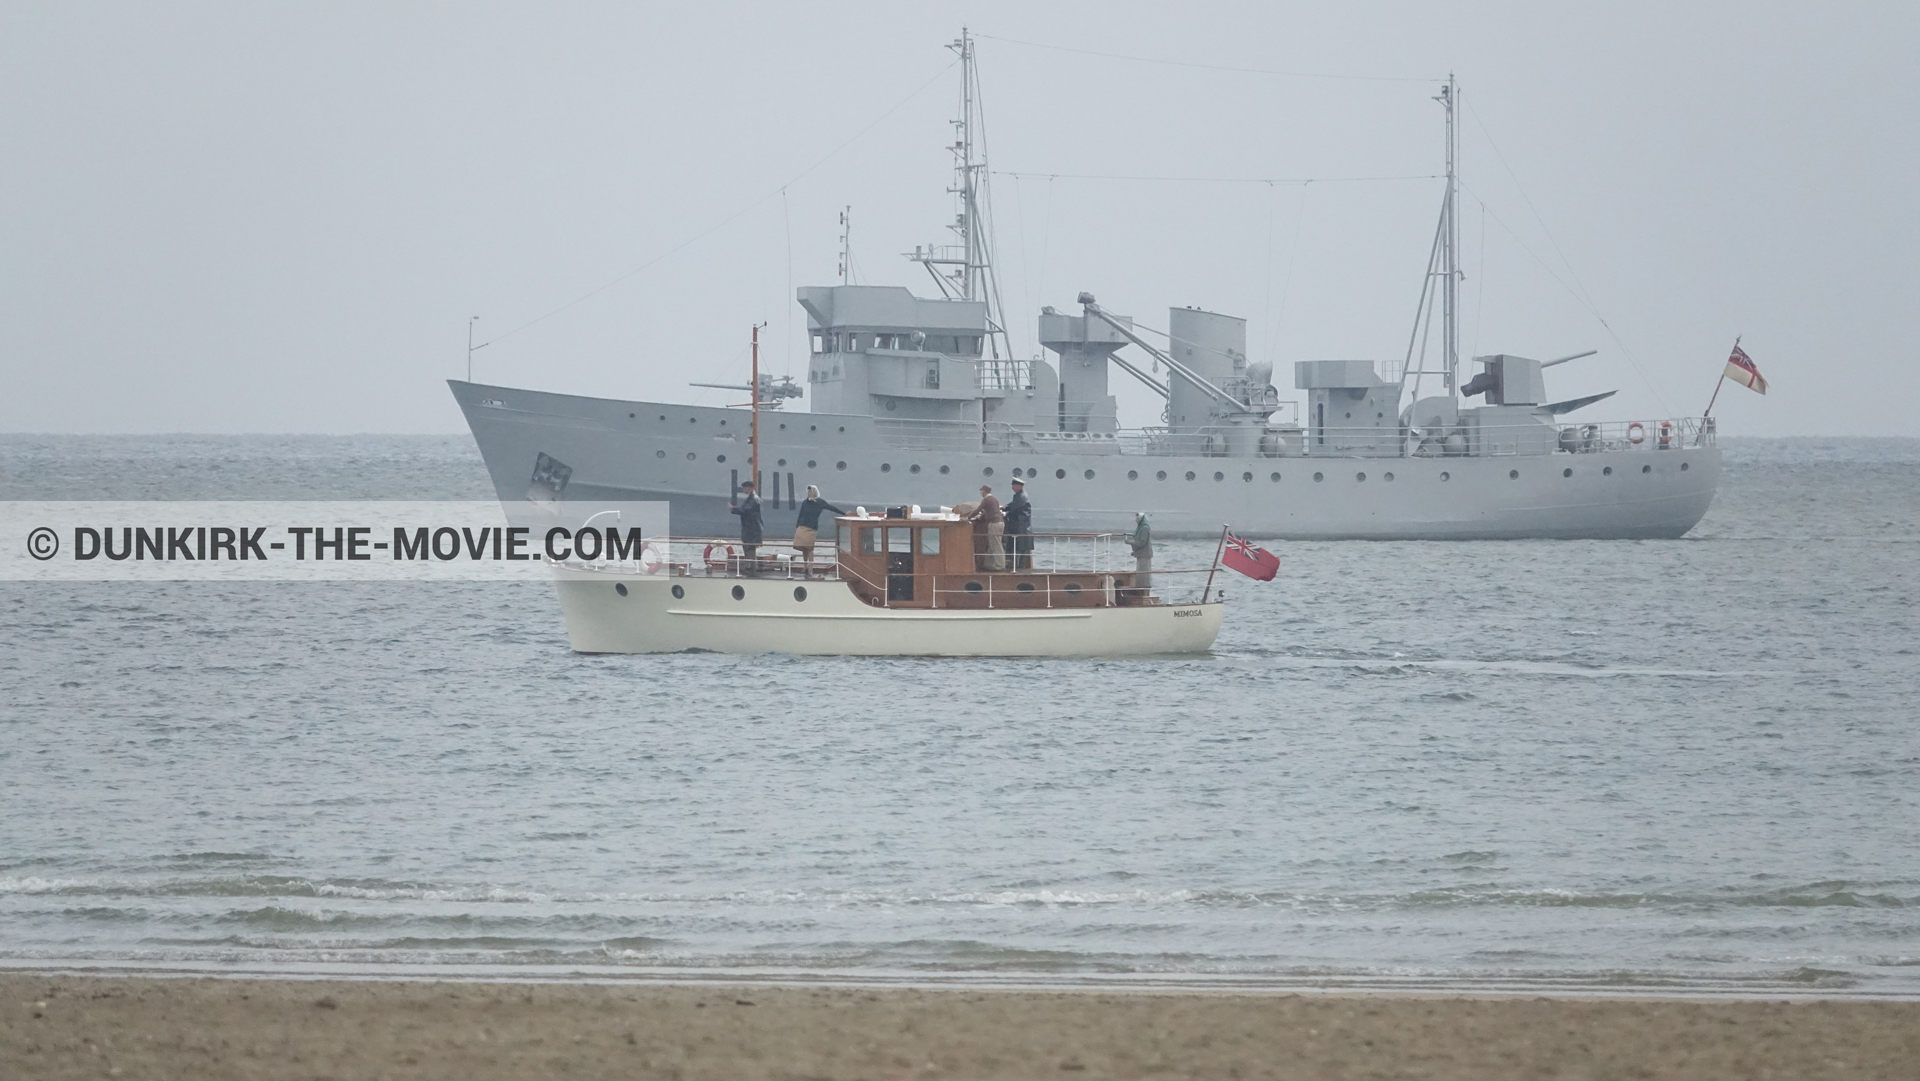 Picture with boat, H11 - MLV Castor, beach,  from behind the scene of the Dunkirk movie by Nolan